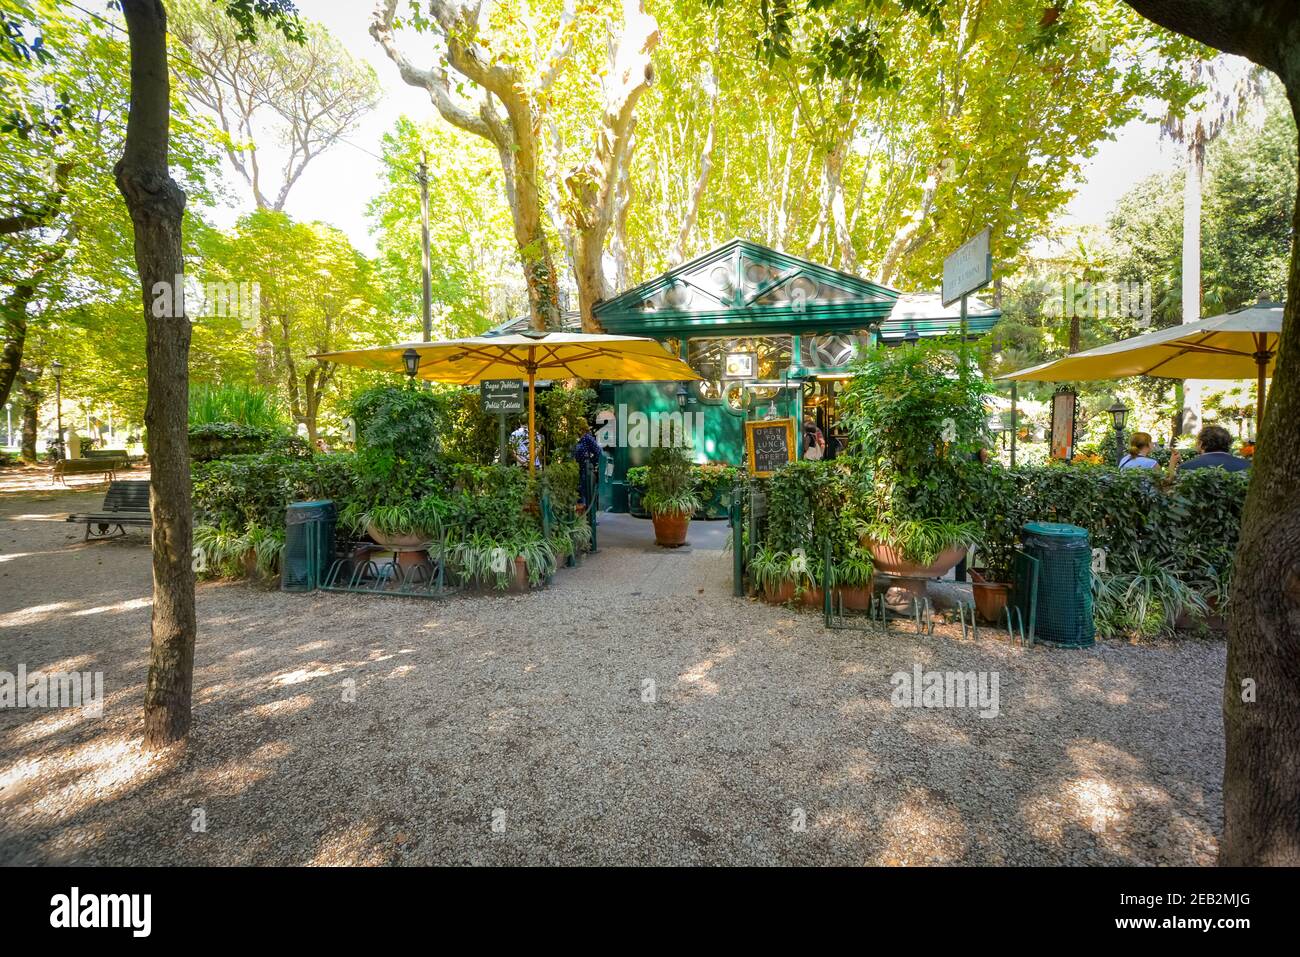 A picturesque, quaint cafe with garden and patio surrounded by trees and ivy in Villa Borghese Park in Rome, Italy Stock Photo